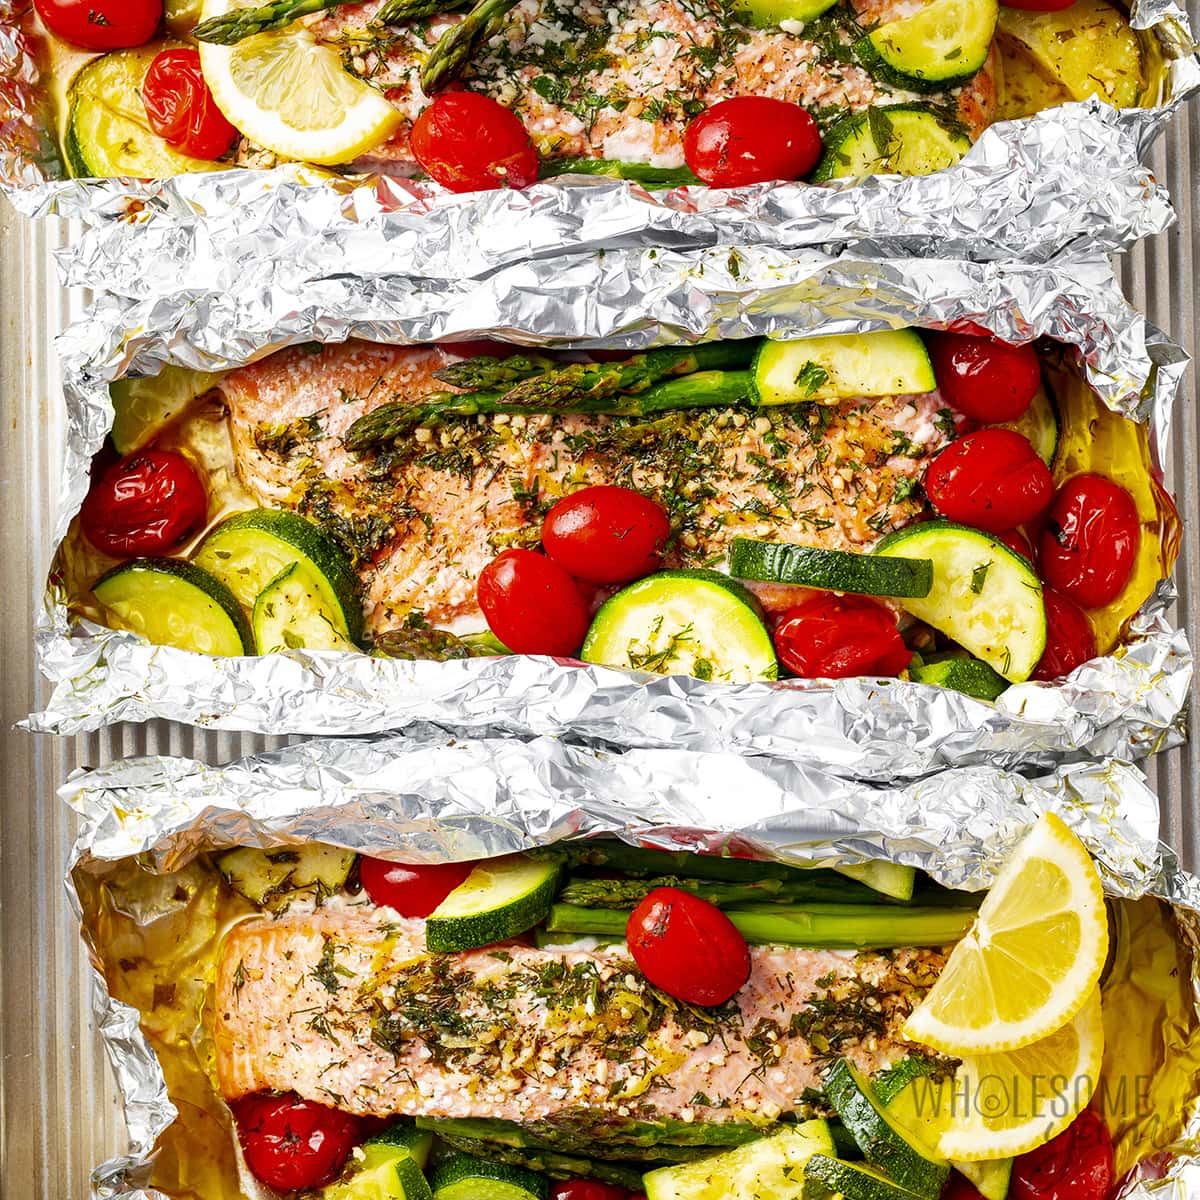 Salmon baked in foil on a baking sheet.